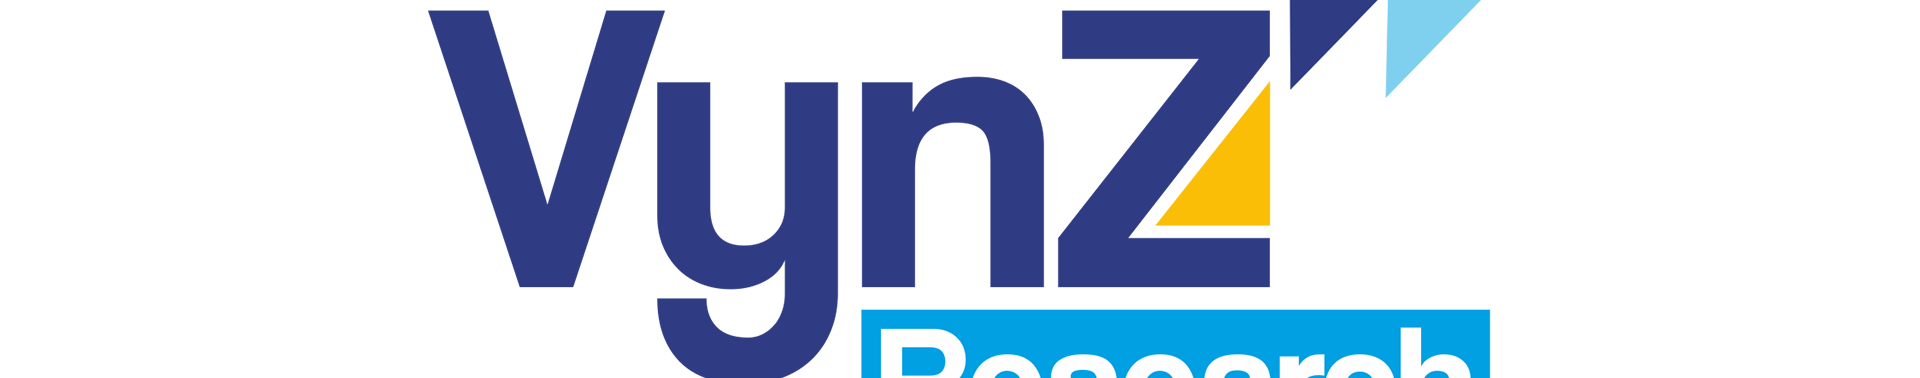 VynZ Research's profile banner